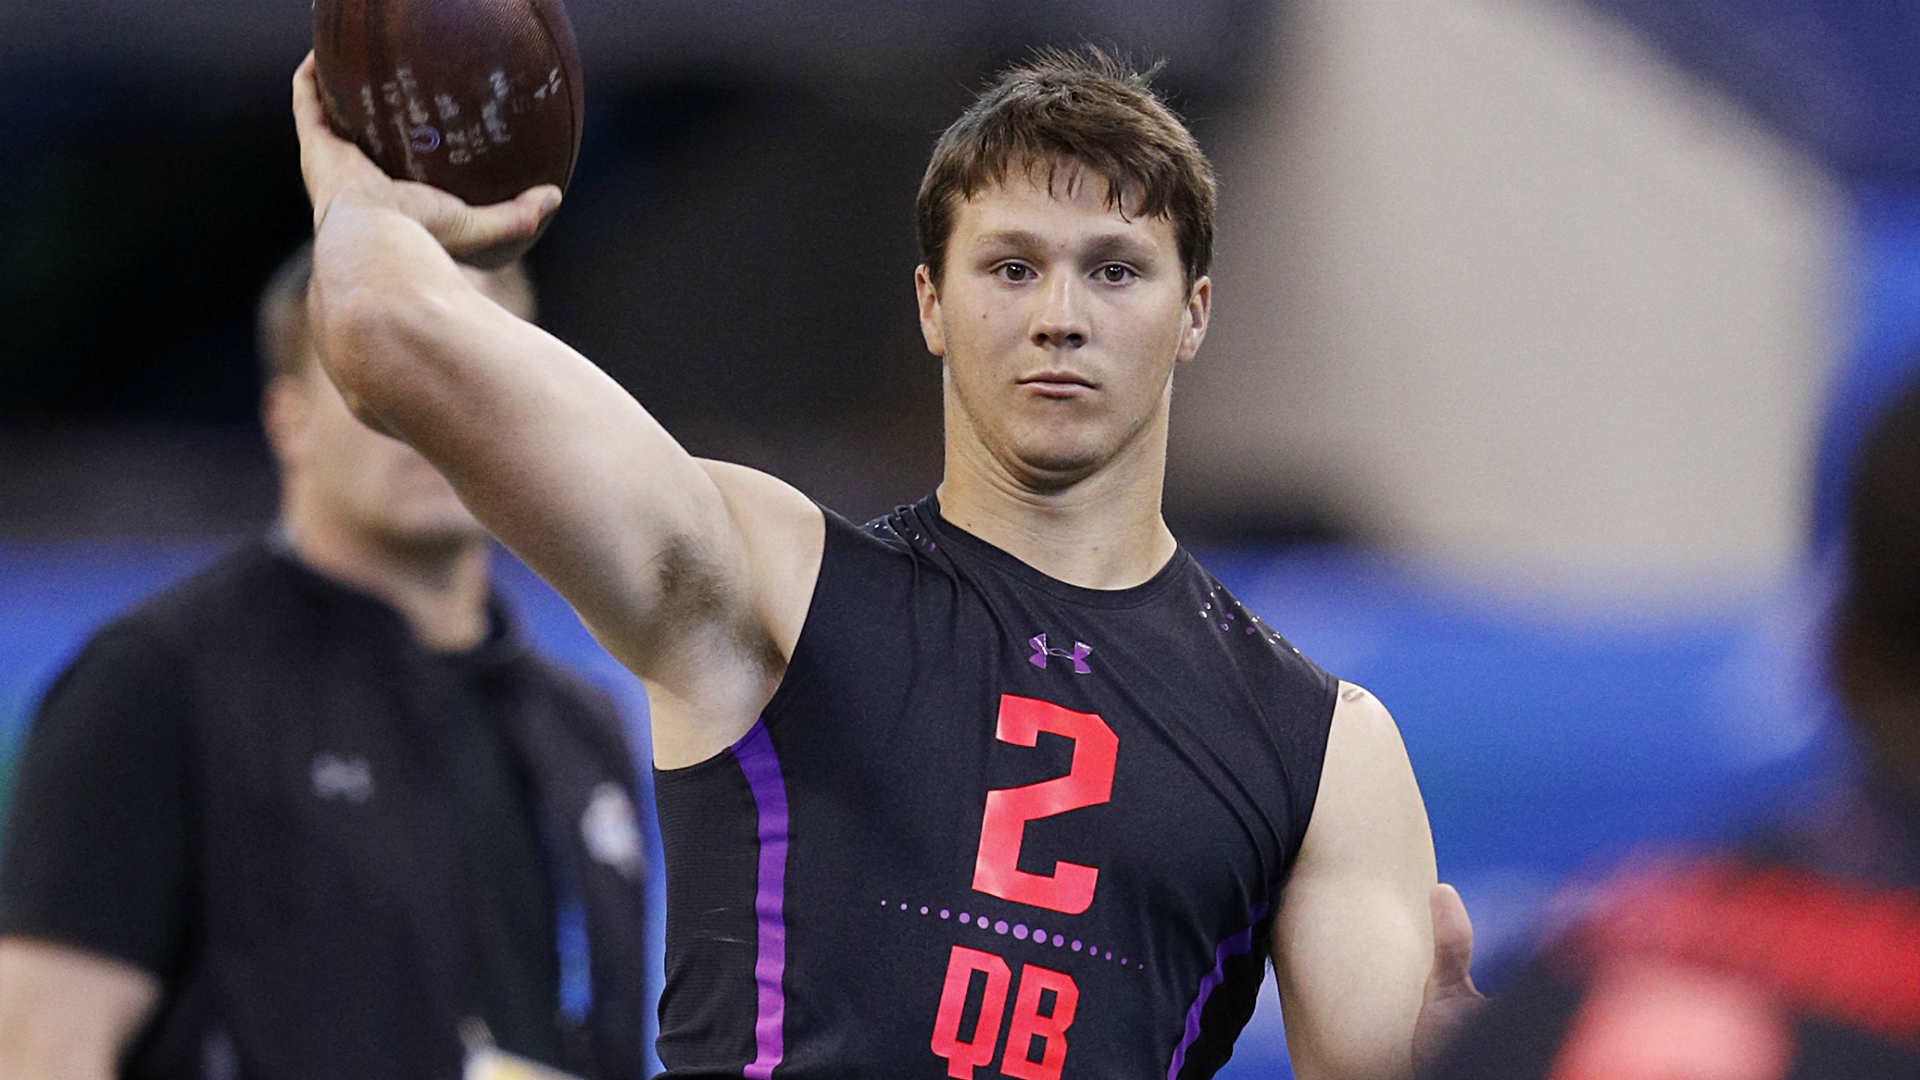 NFL Draft: Josh Allen ready to impress Jets, other teams at Wyoming Pro